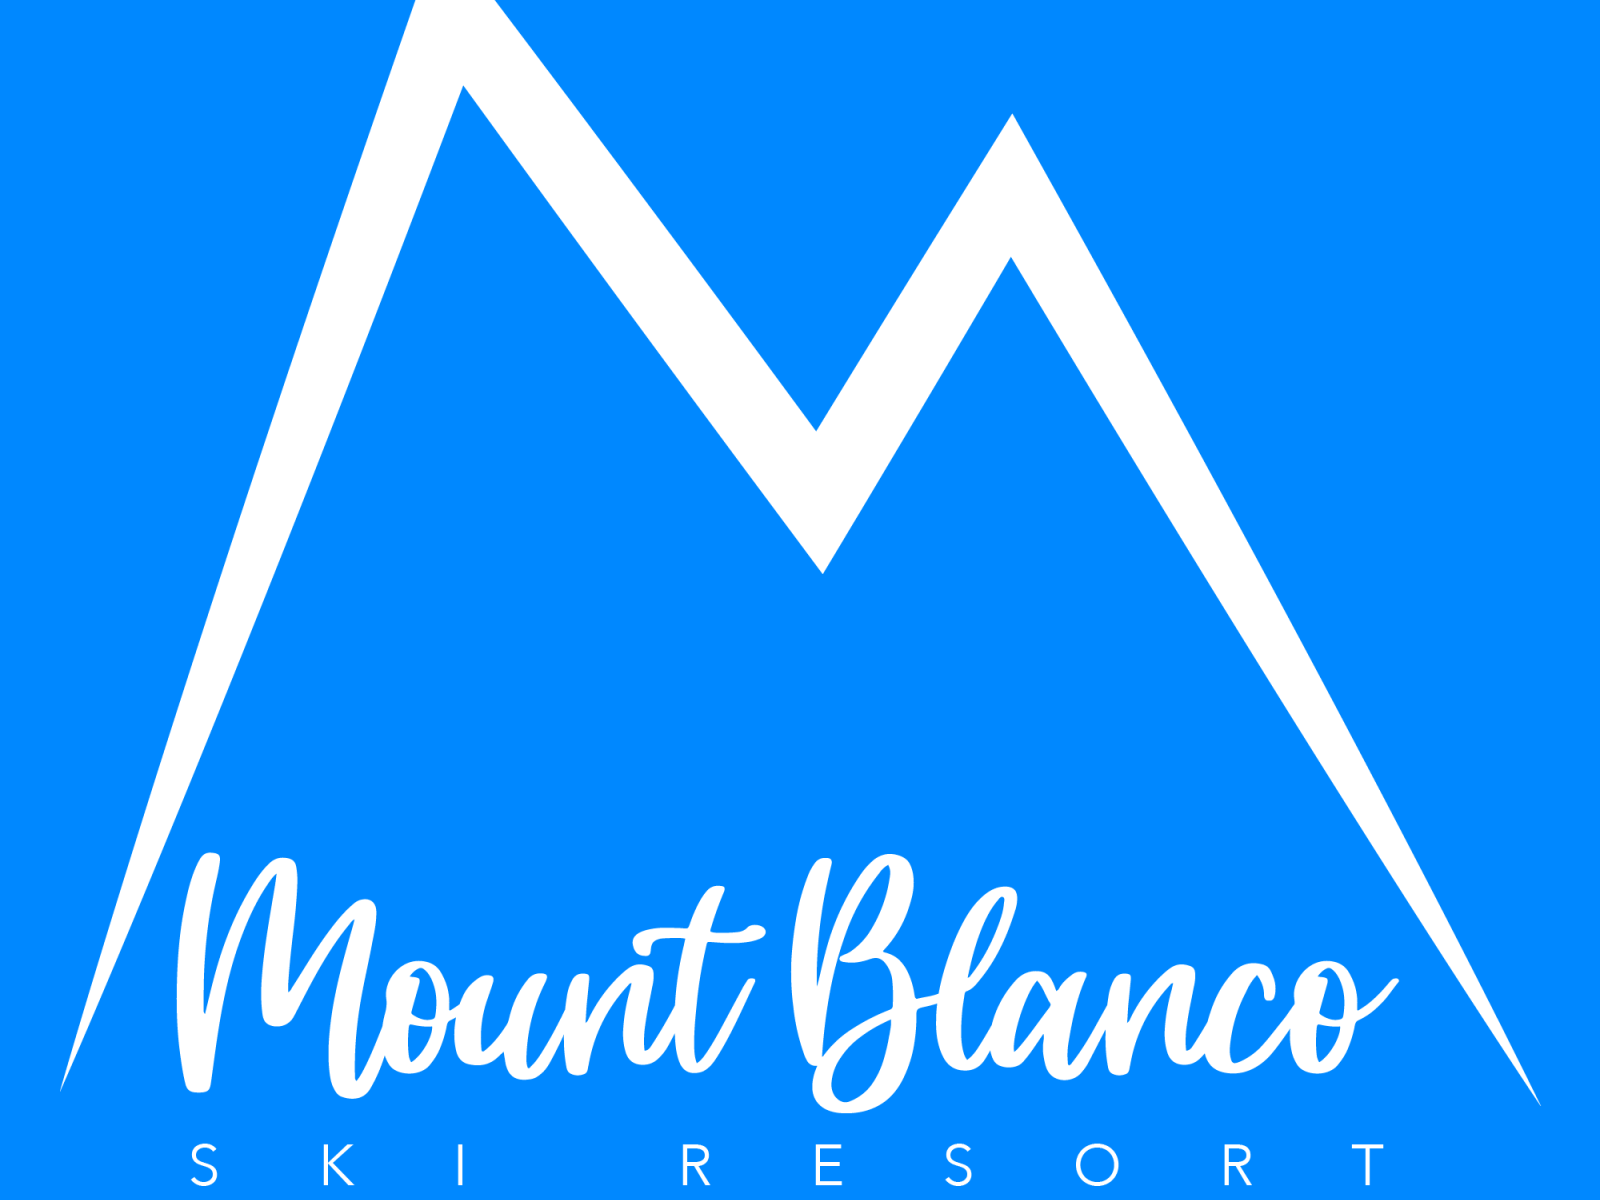 mount blanco by Michael Ullegue on Dribbble